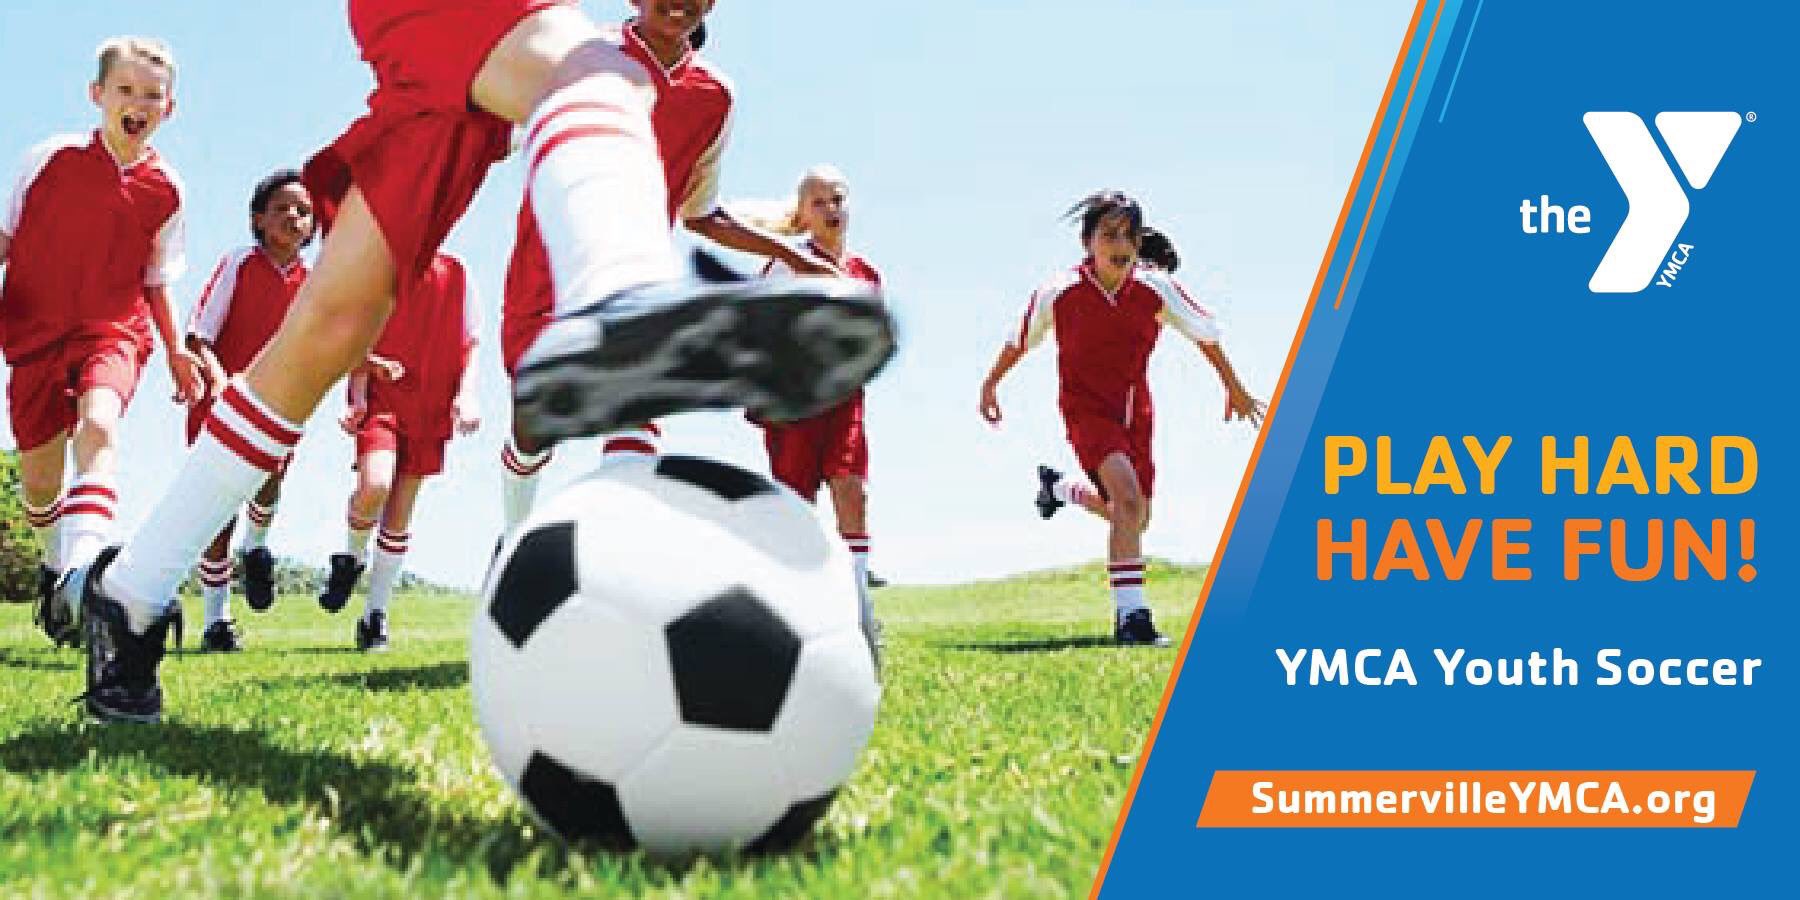 Summerville YMCA on Twitter "Today is the last day for spring soccer